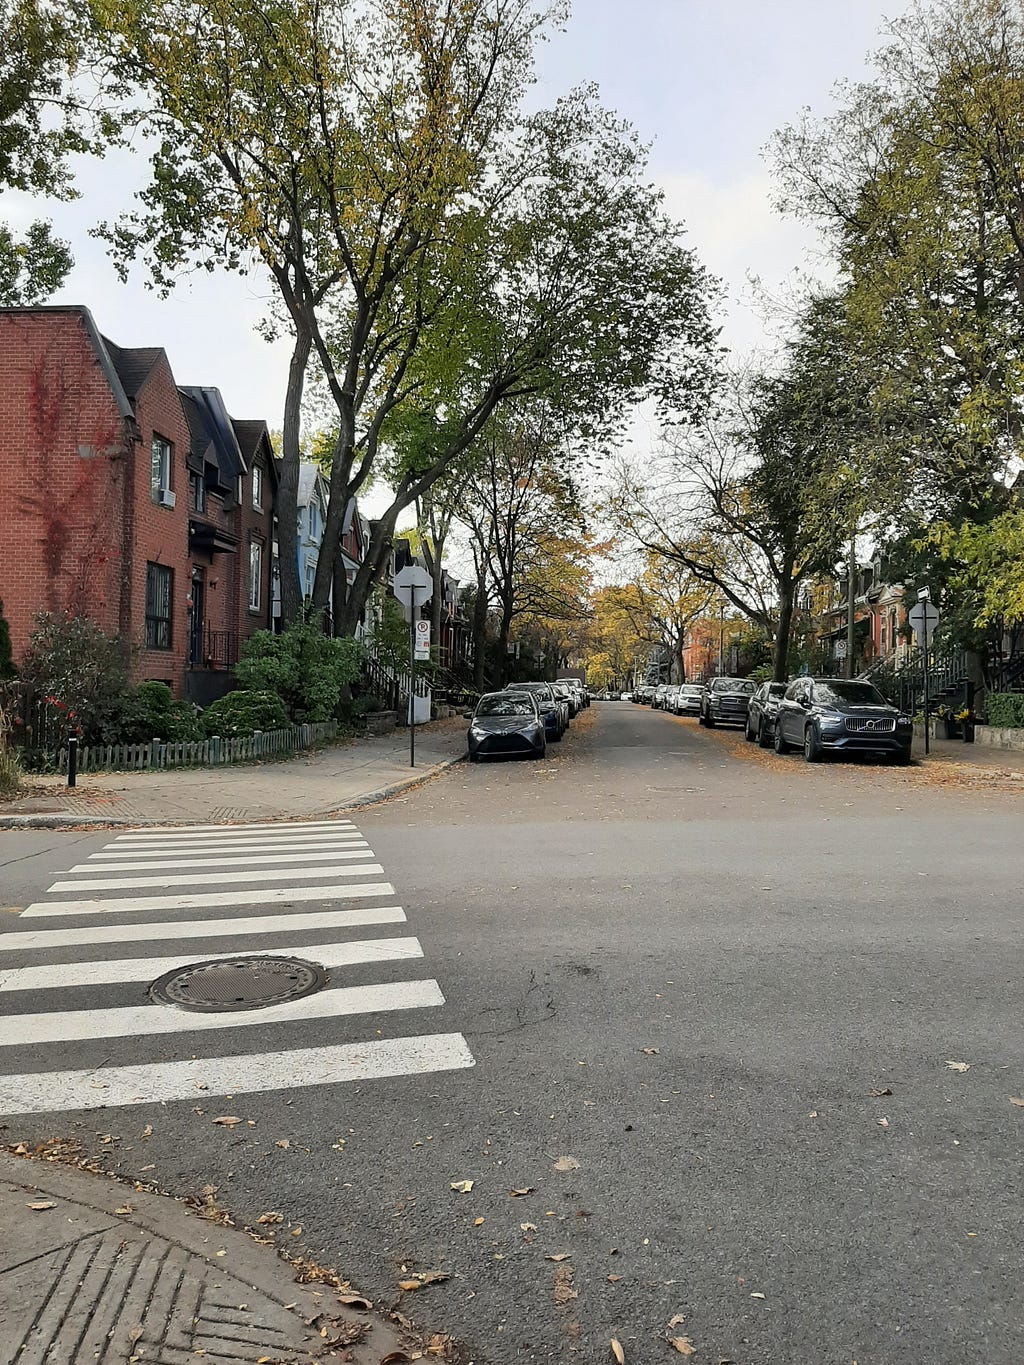 A street view in Griffintown Montreal. There is a crosswalk, cars parked along the street, a brick house and lots of fall leaves.